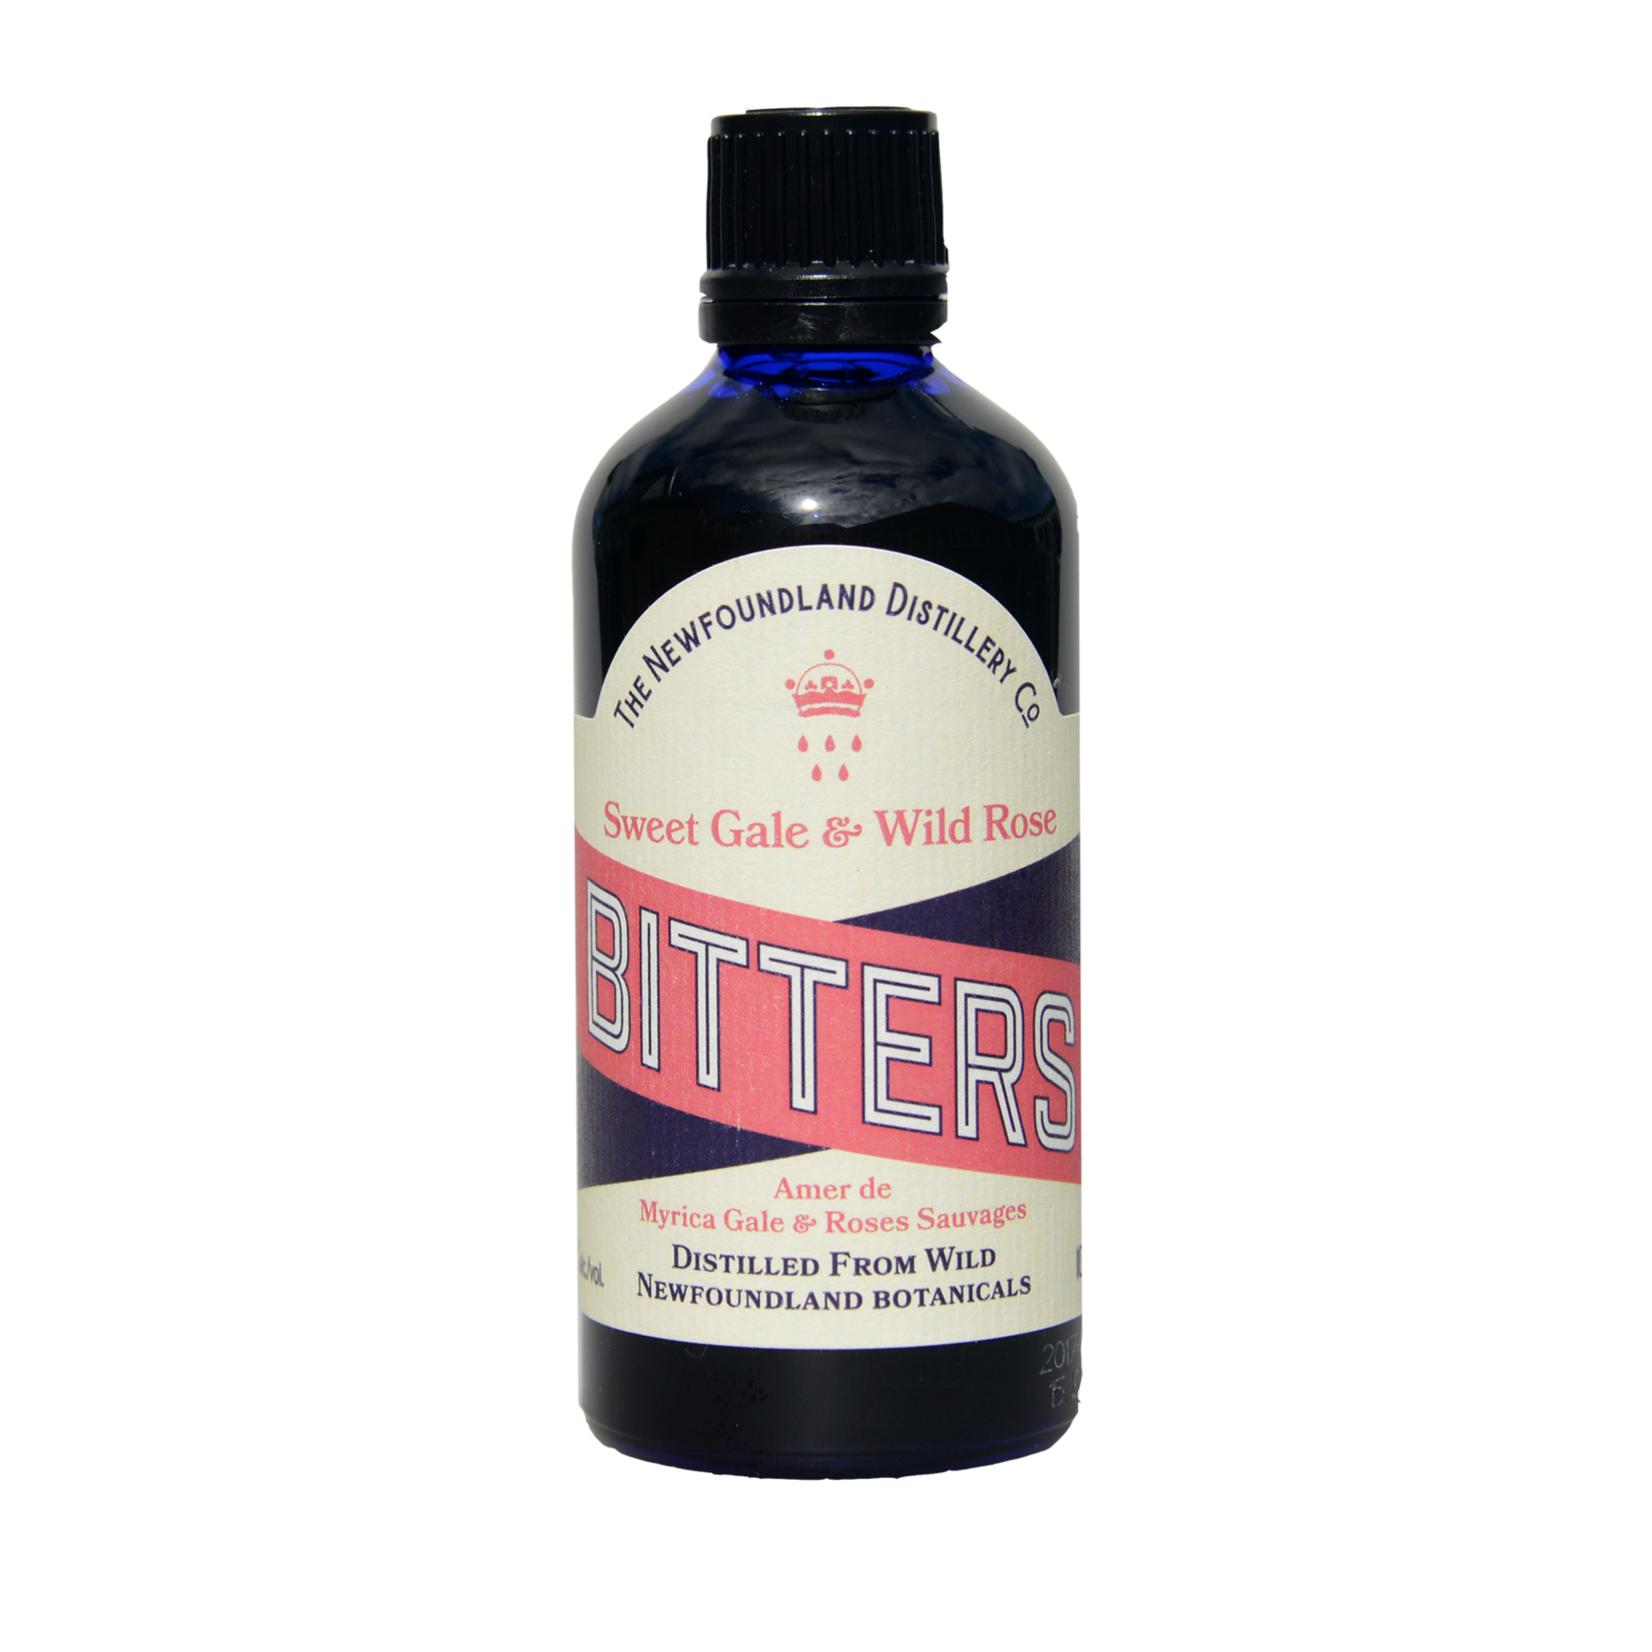 The Newfoundland Distillery Co The Newfoundland Distillery Co Bitters Sweet Gale and Wild Rose